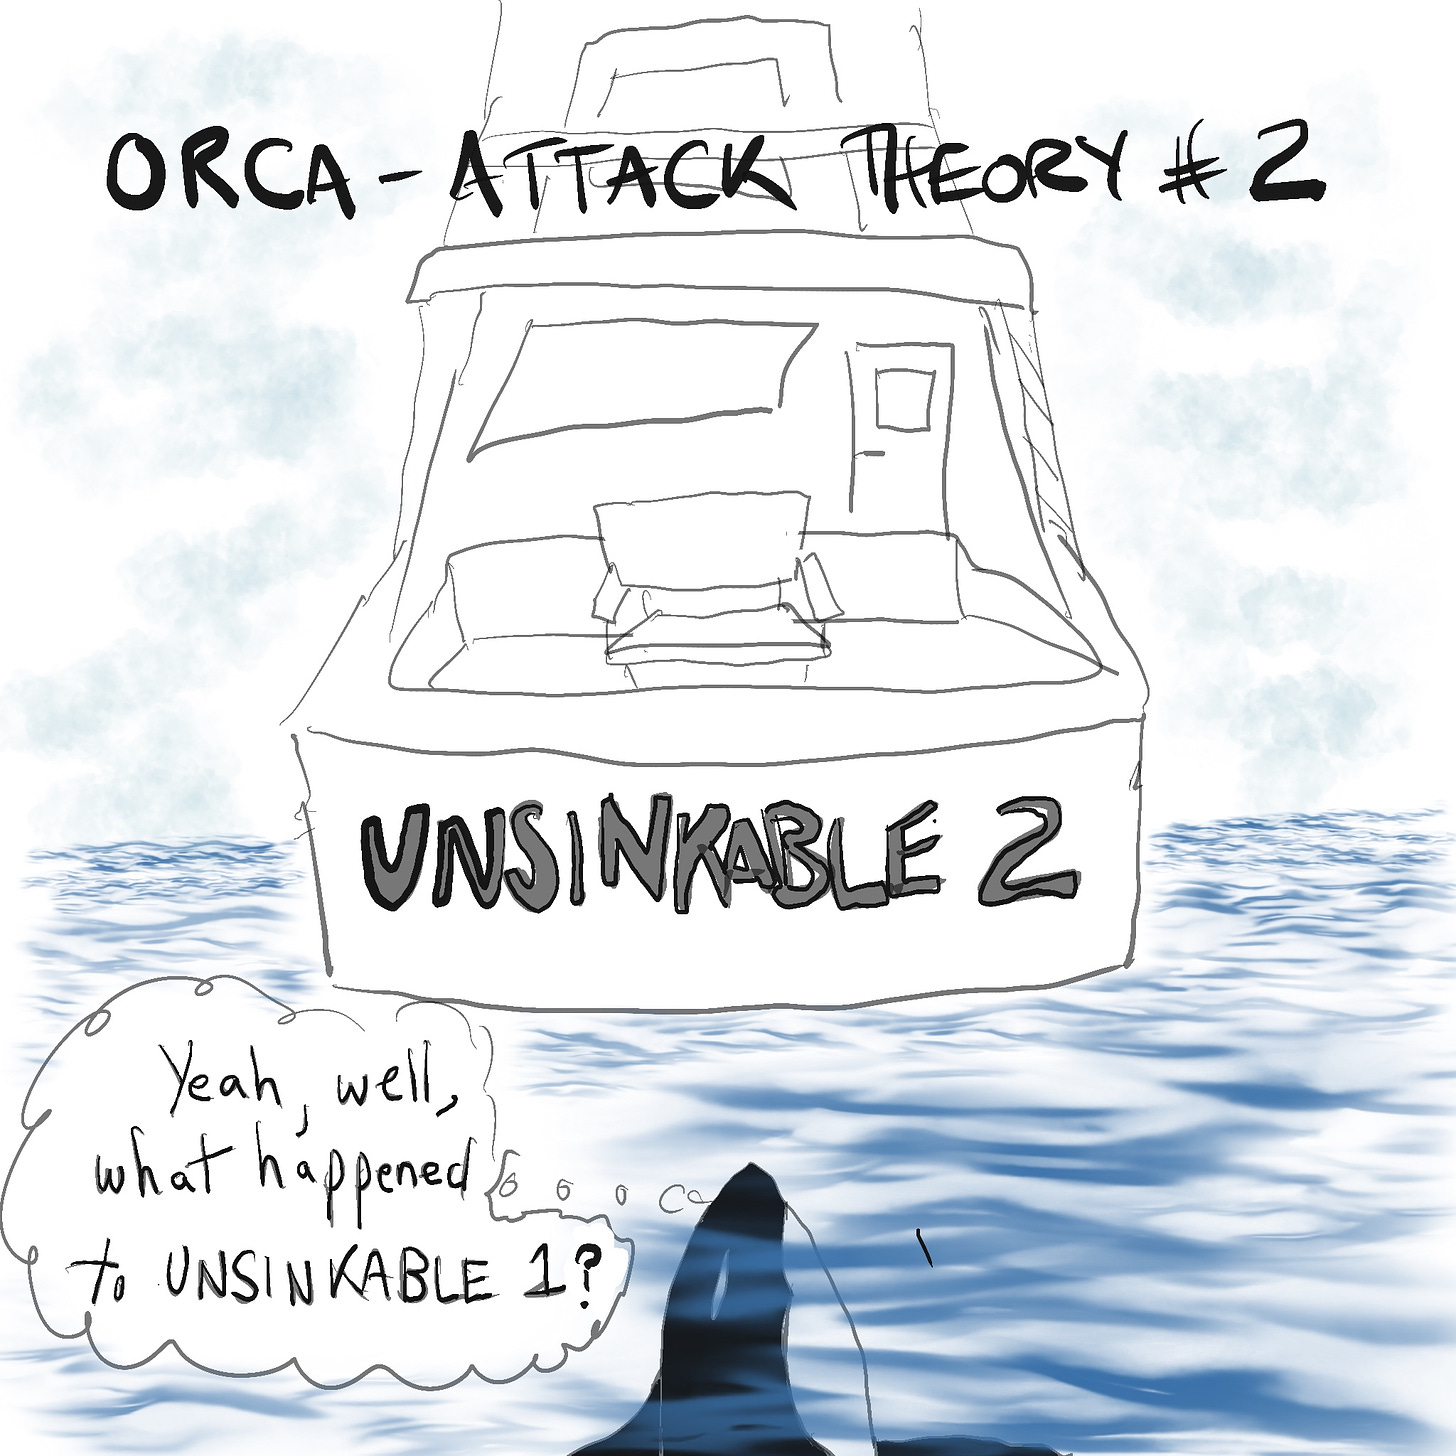 Orca considers sinking a boat called "Unsinkable 2"